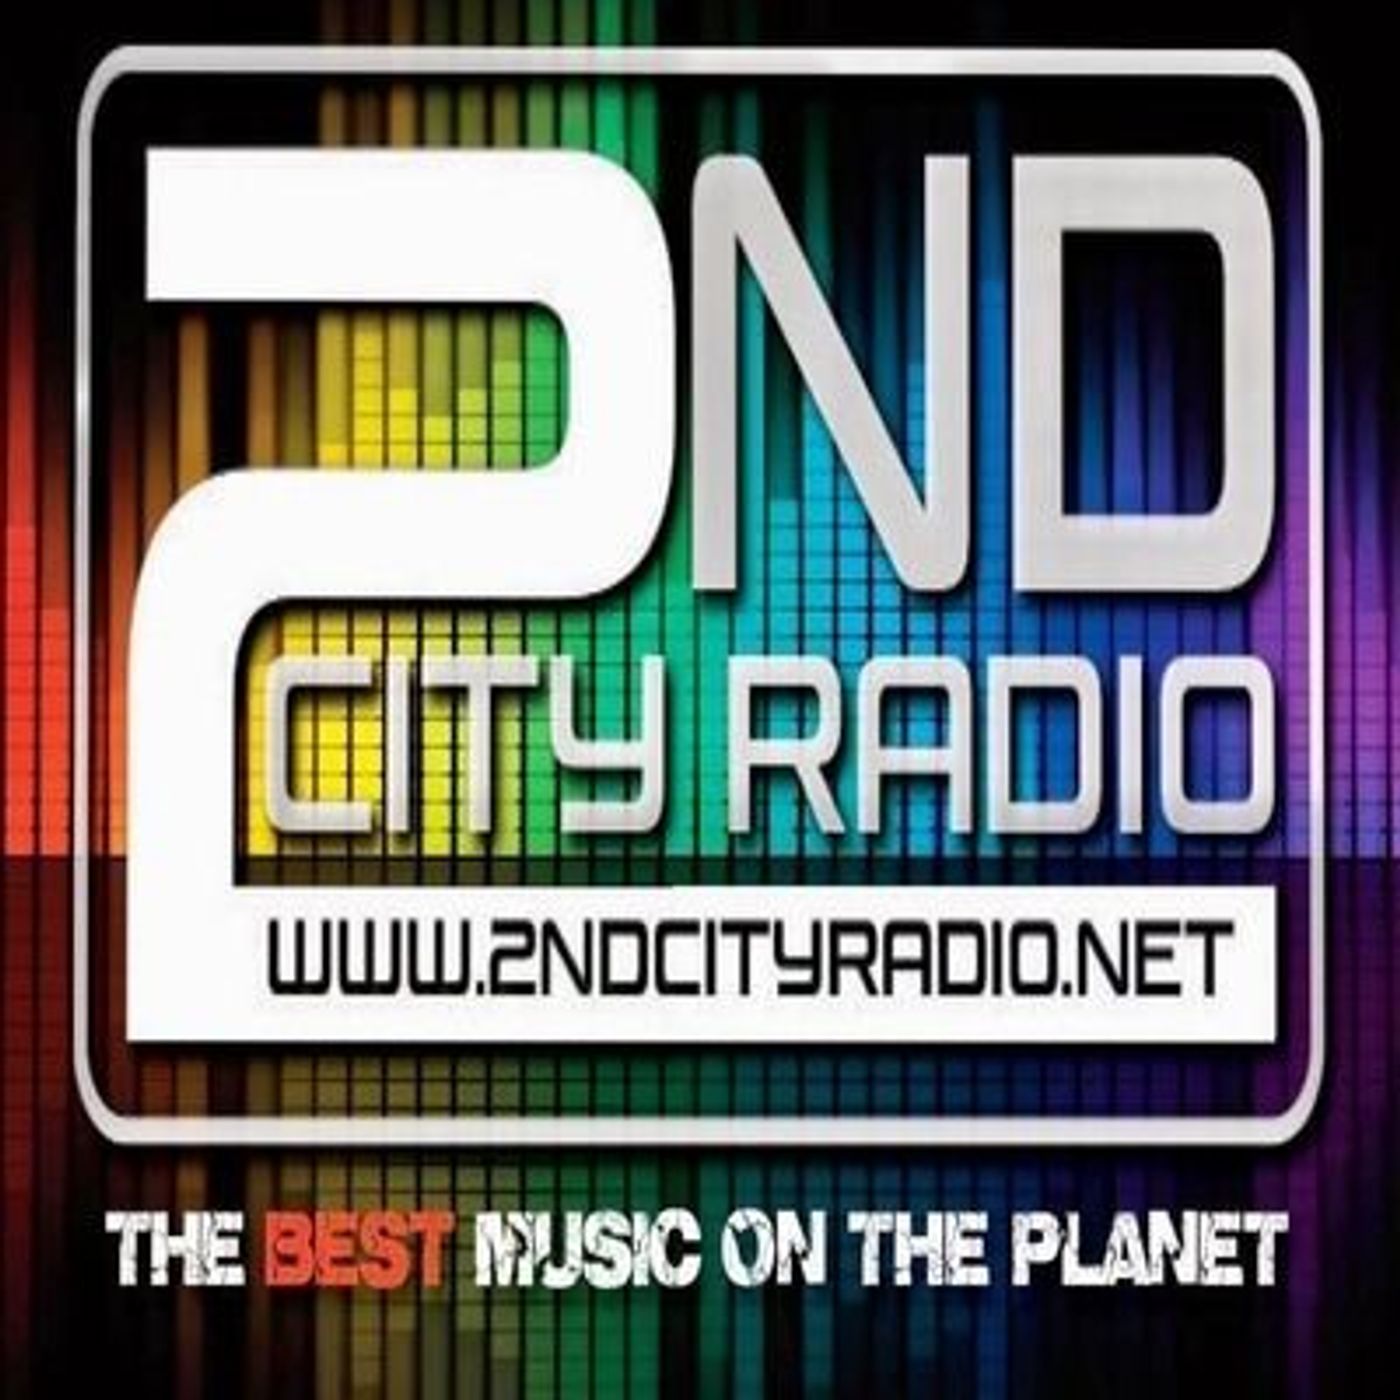 Thursday the 5th of May 2022 on 2ndcity Radio with Classic Chat